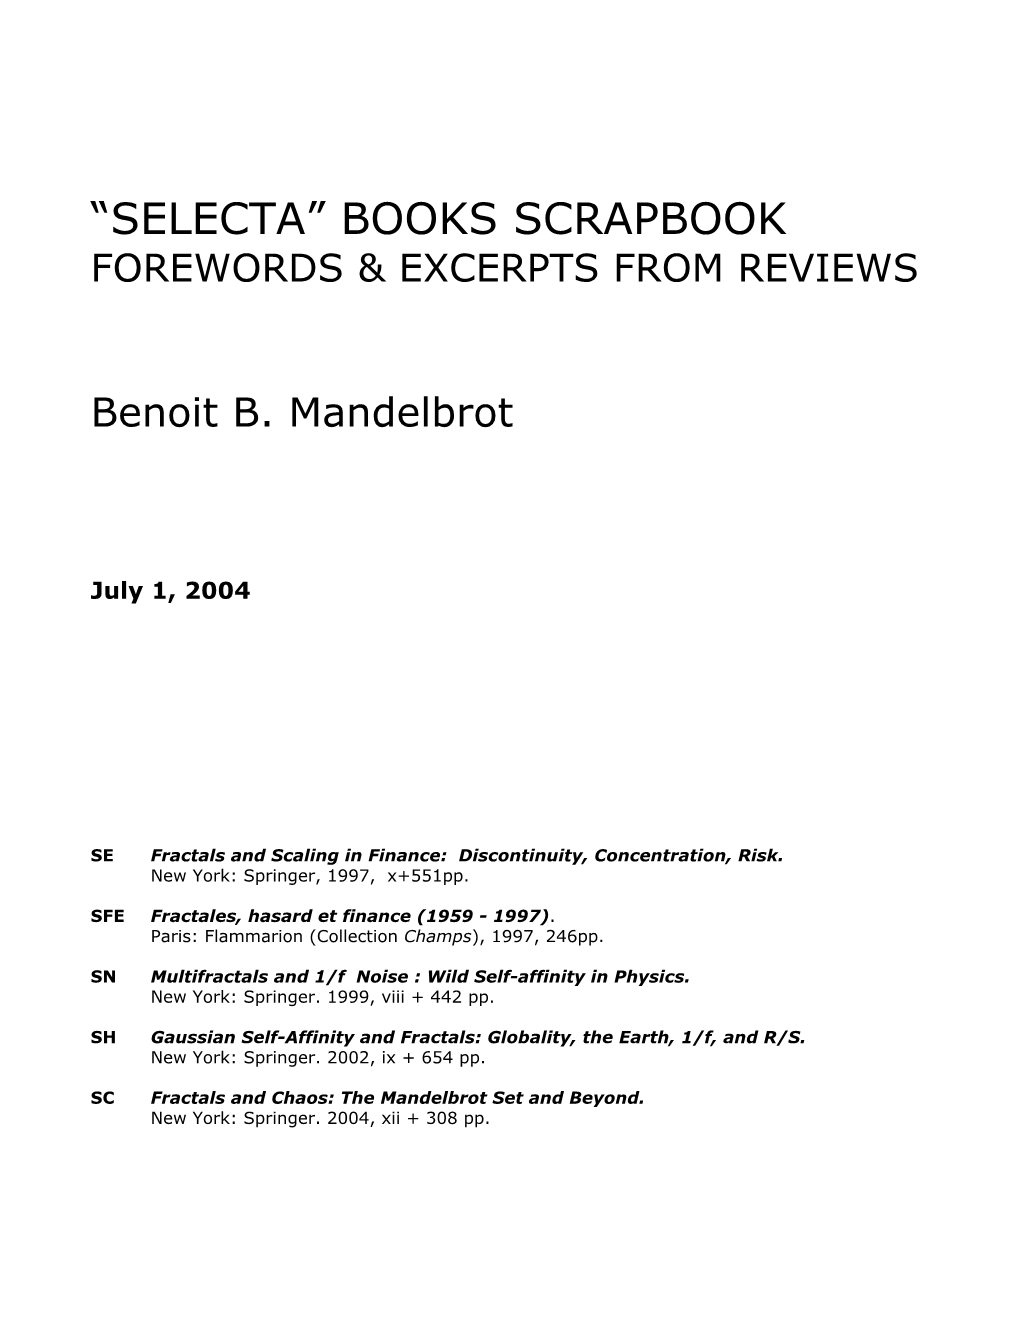 “Selecta” Books Scrapbook Forewords & Excerpts from Reviews